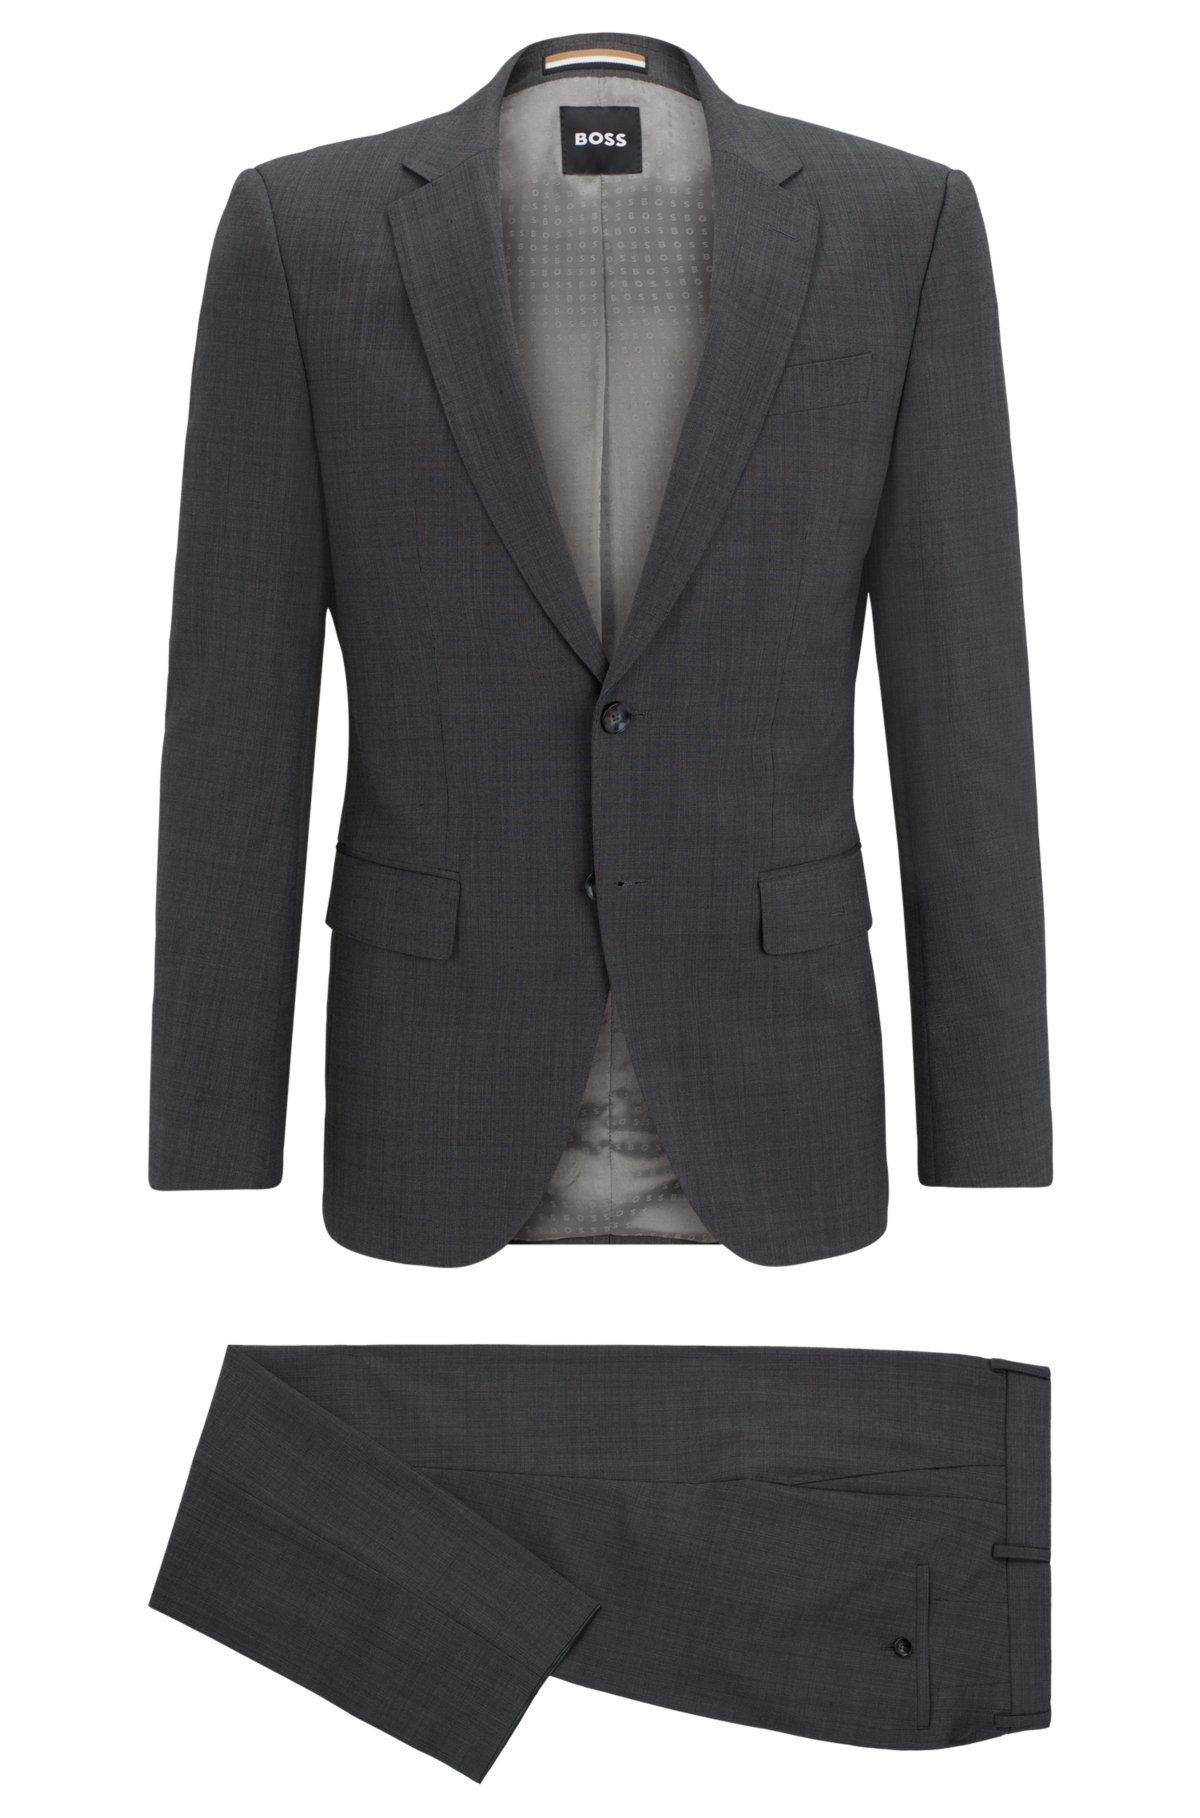 BOSS - Slim-fit suit in micro-patterned stretch cloth